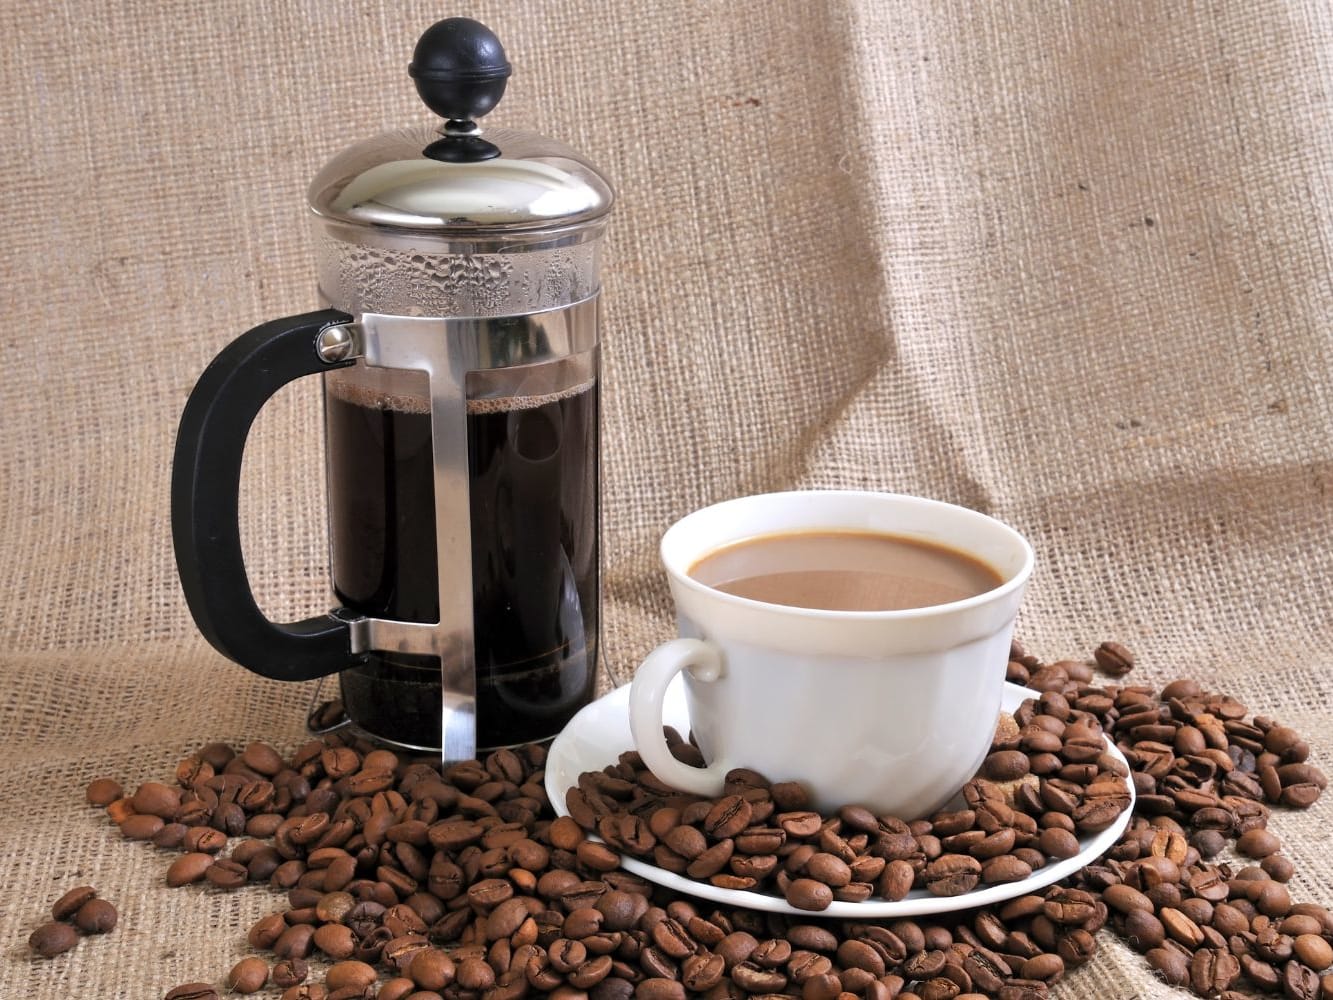 The 5 best French press coffee makers of 2022